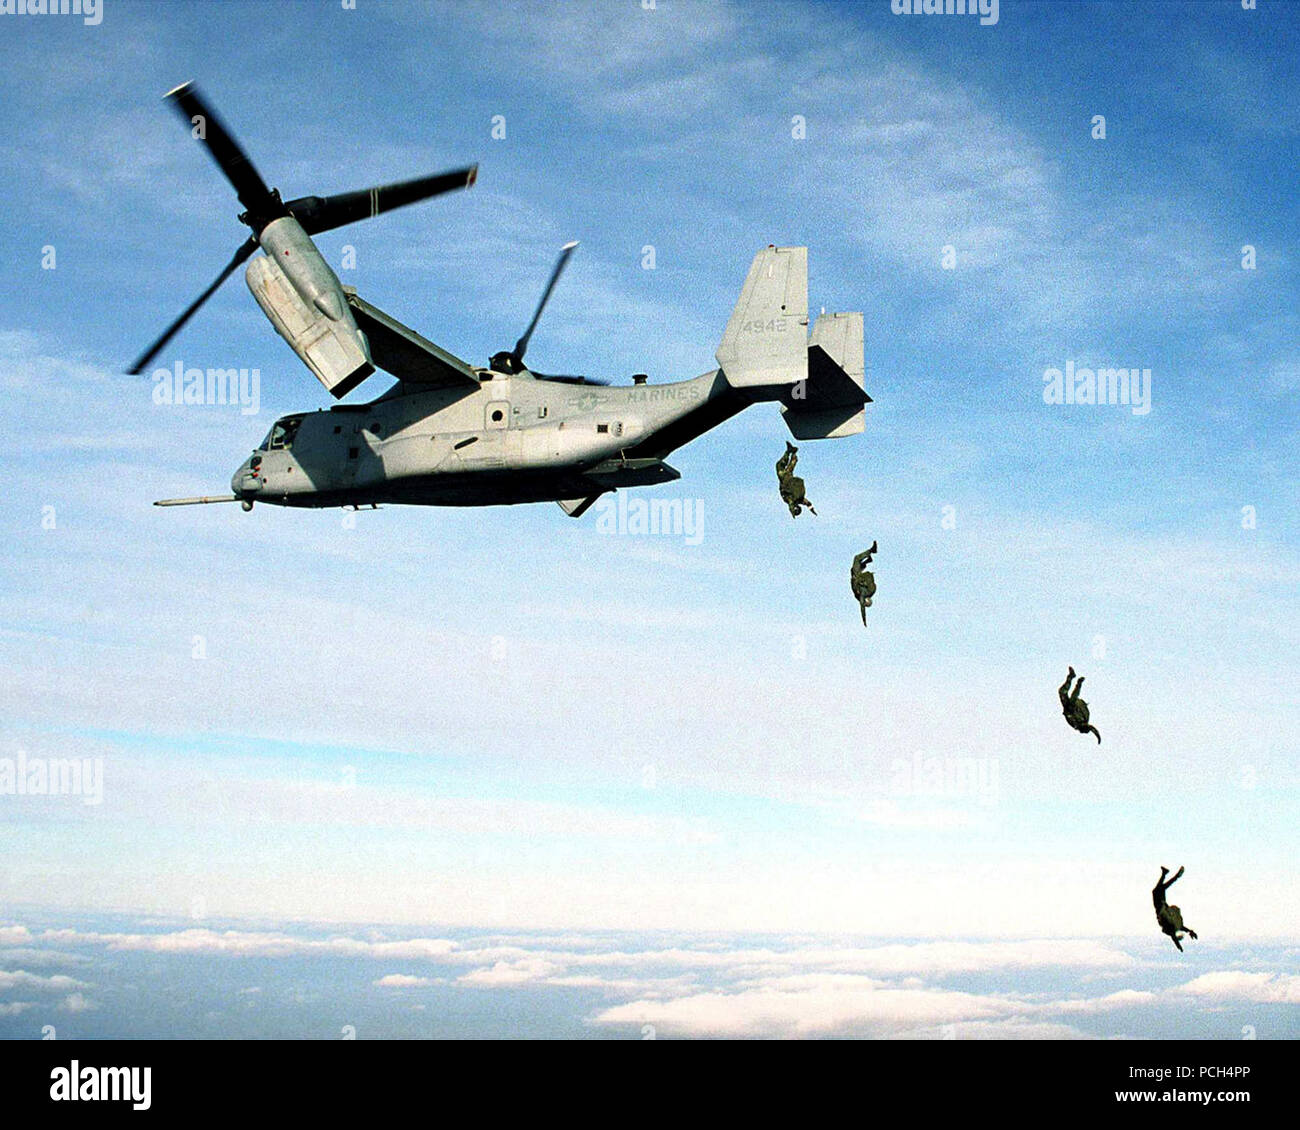 000100-M-0000P-001 U.S. Marine Corps parachutists free fall from an MV-22 Osprey at 10,000 feet above the drop zone at Fort A.P. Hill, Va. on Jan. 17, 2000.  The Marines from the 2nd Reconnaissance Battalion, 2nd Marine Expeditionary Force, Camp Lejeune, N.C., became the first to deploy from the Osprey.  Twenty-four successful jumps were recorded under the supervision of the U.S. Army Operational Test Command and the Marine Corps Systems Command to qualify the V-22 for parachute service. Stock Photo